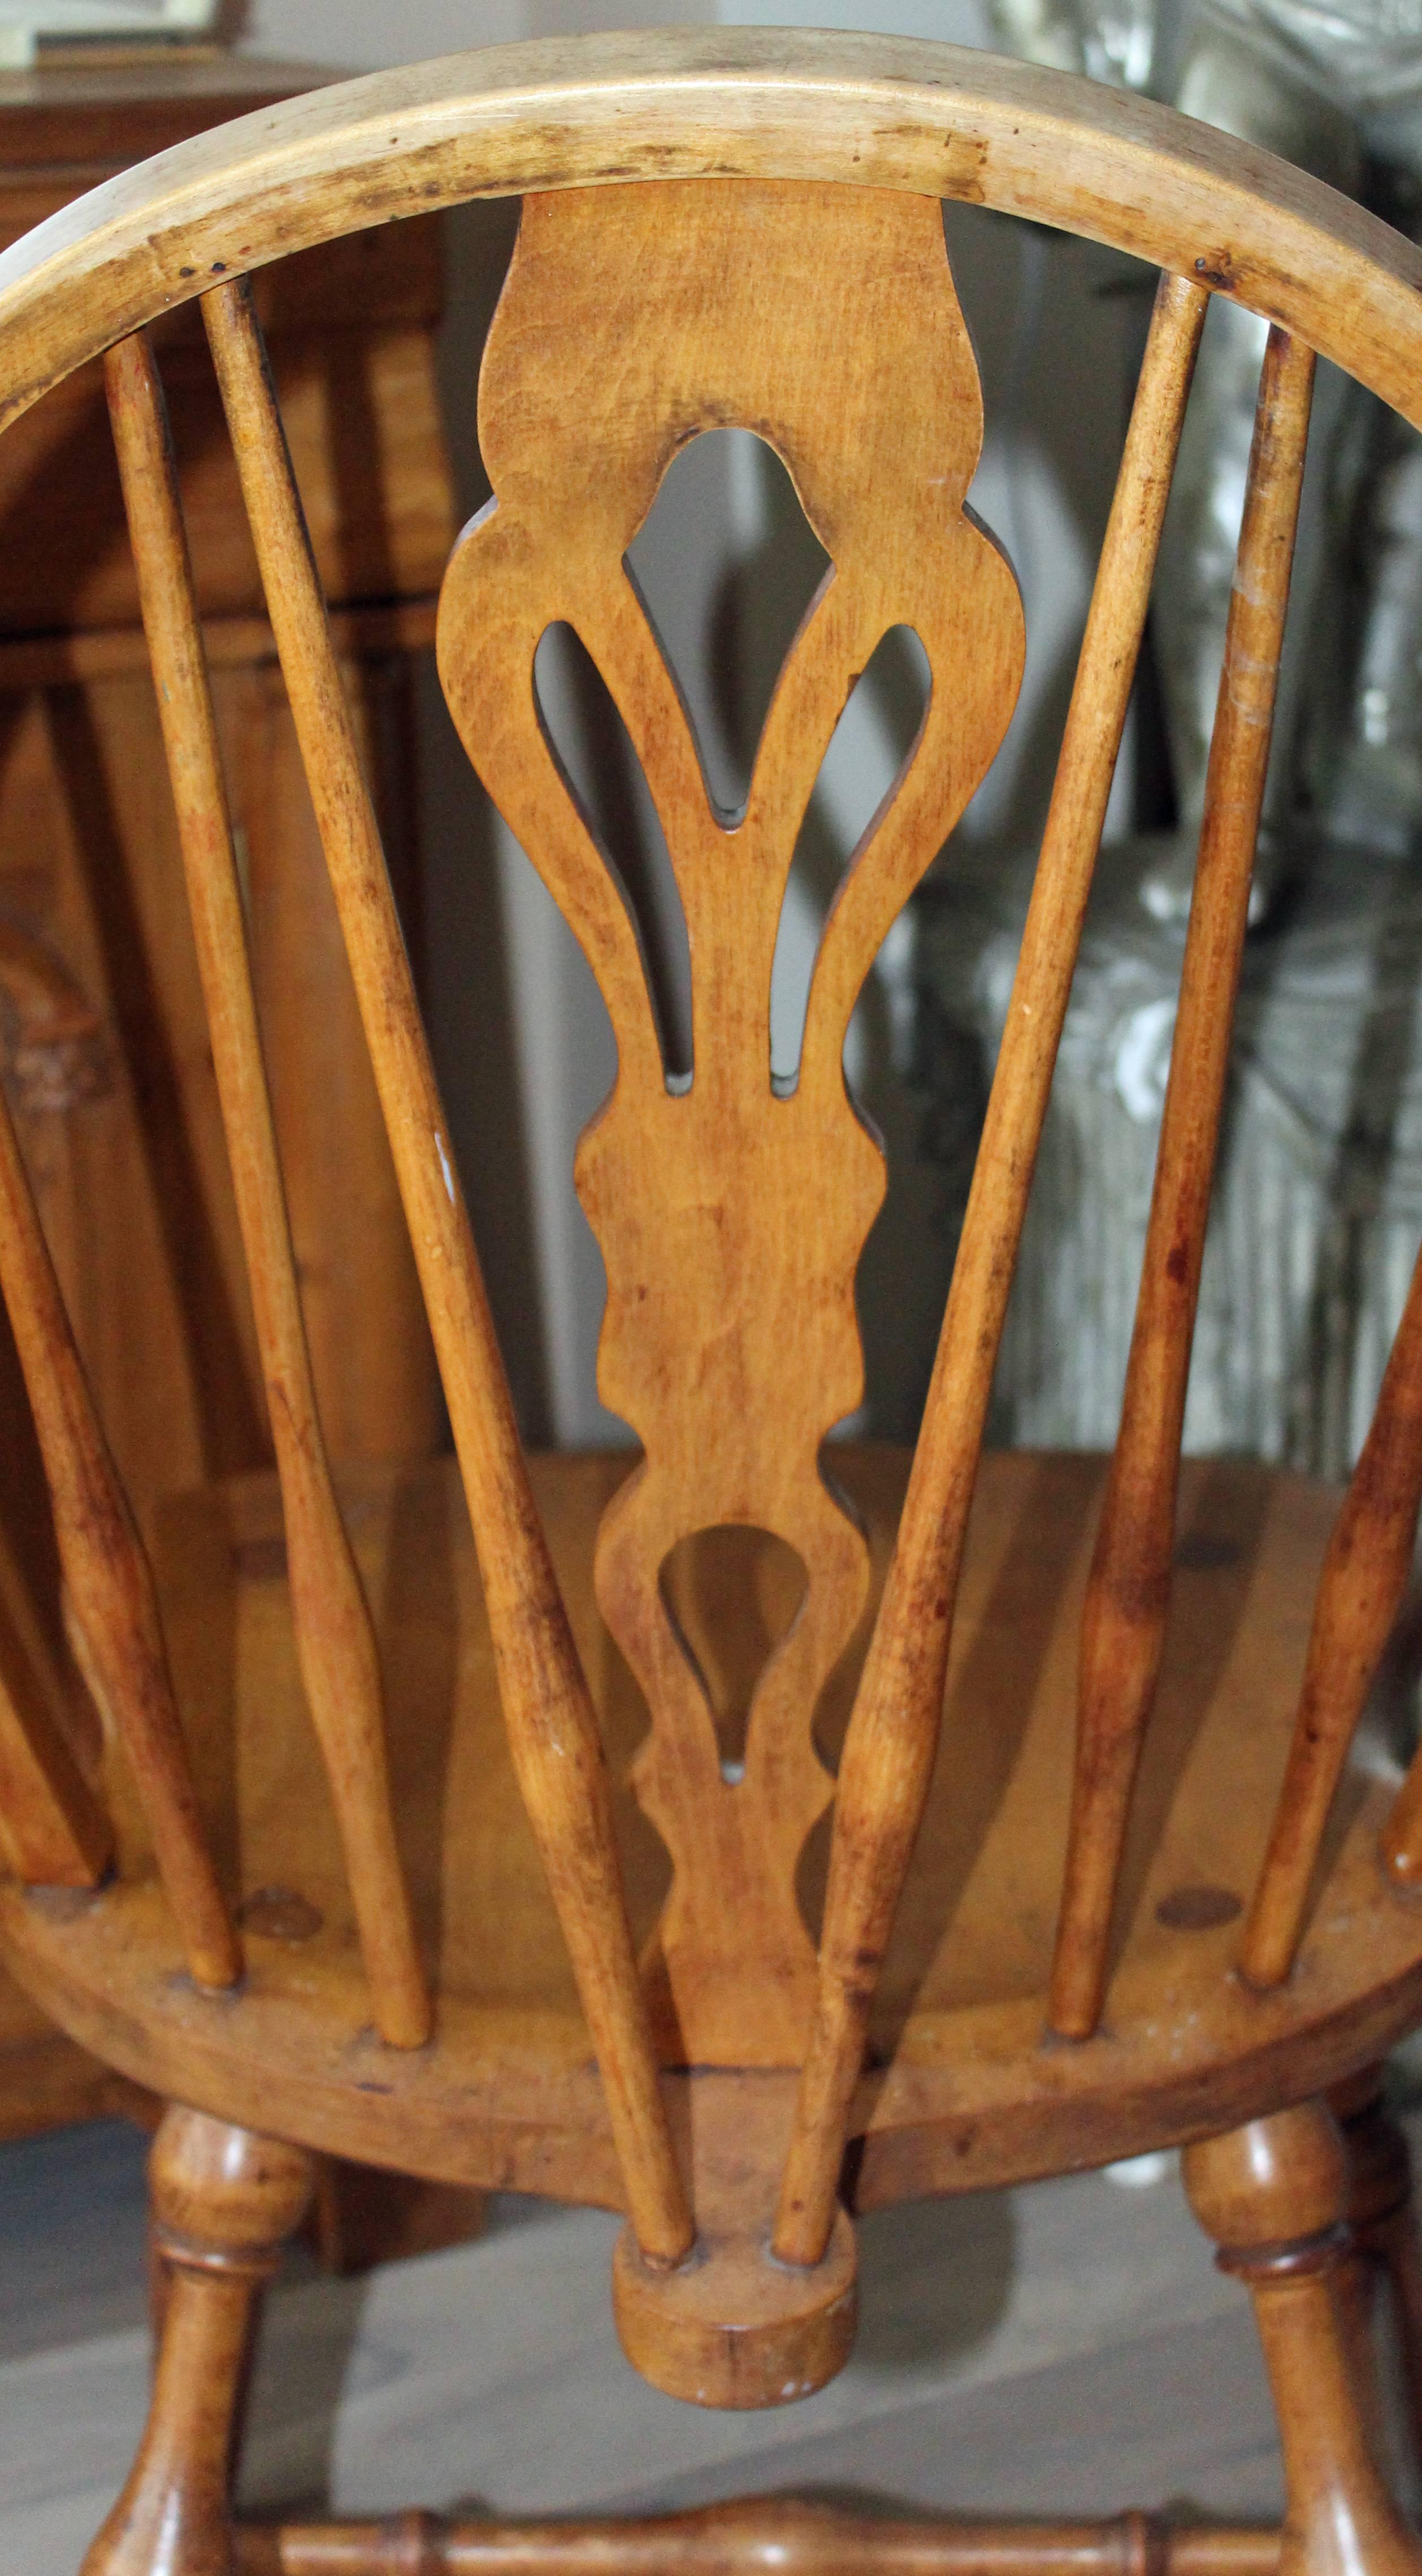 Turned English Windsor Bow-Brace Back Dining Chairs with Decorative Splat